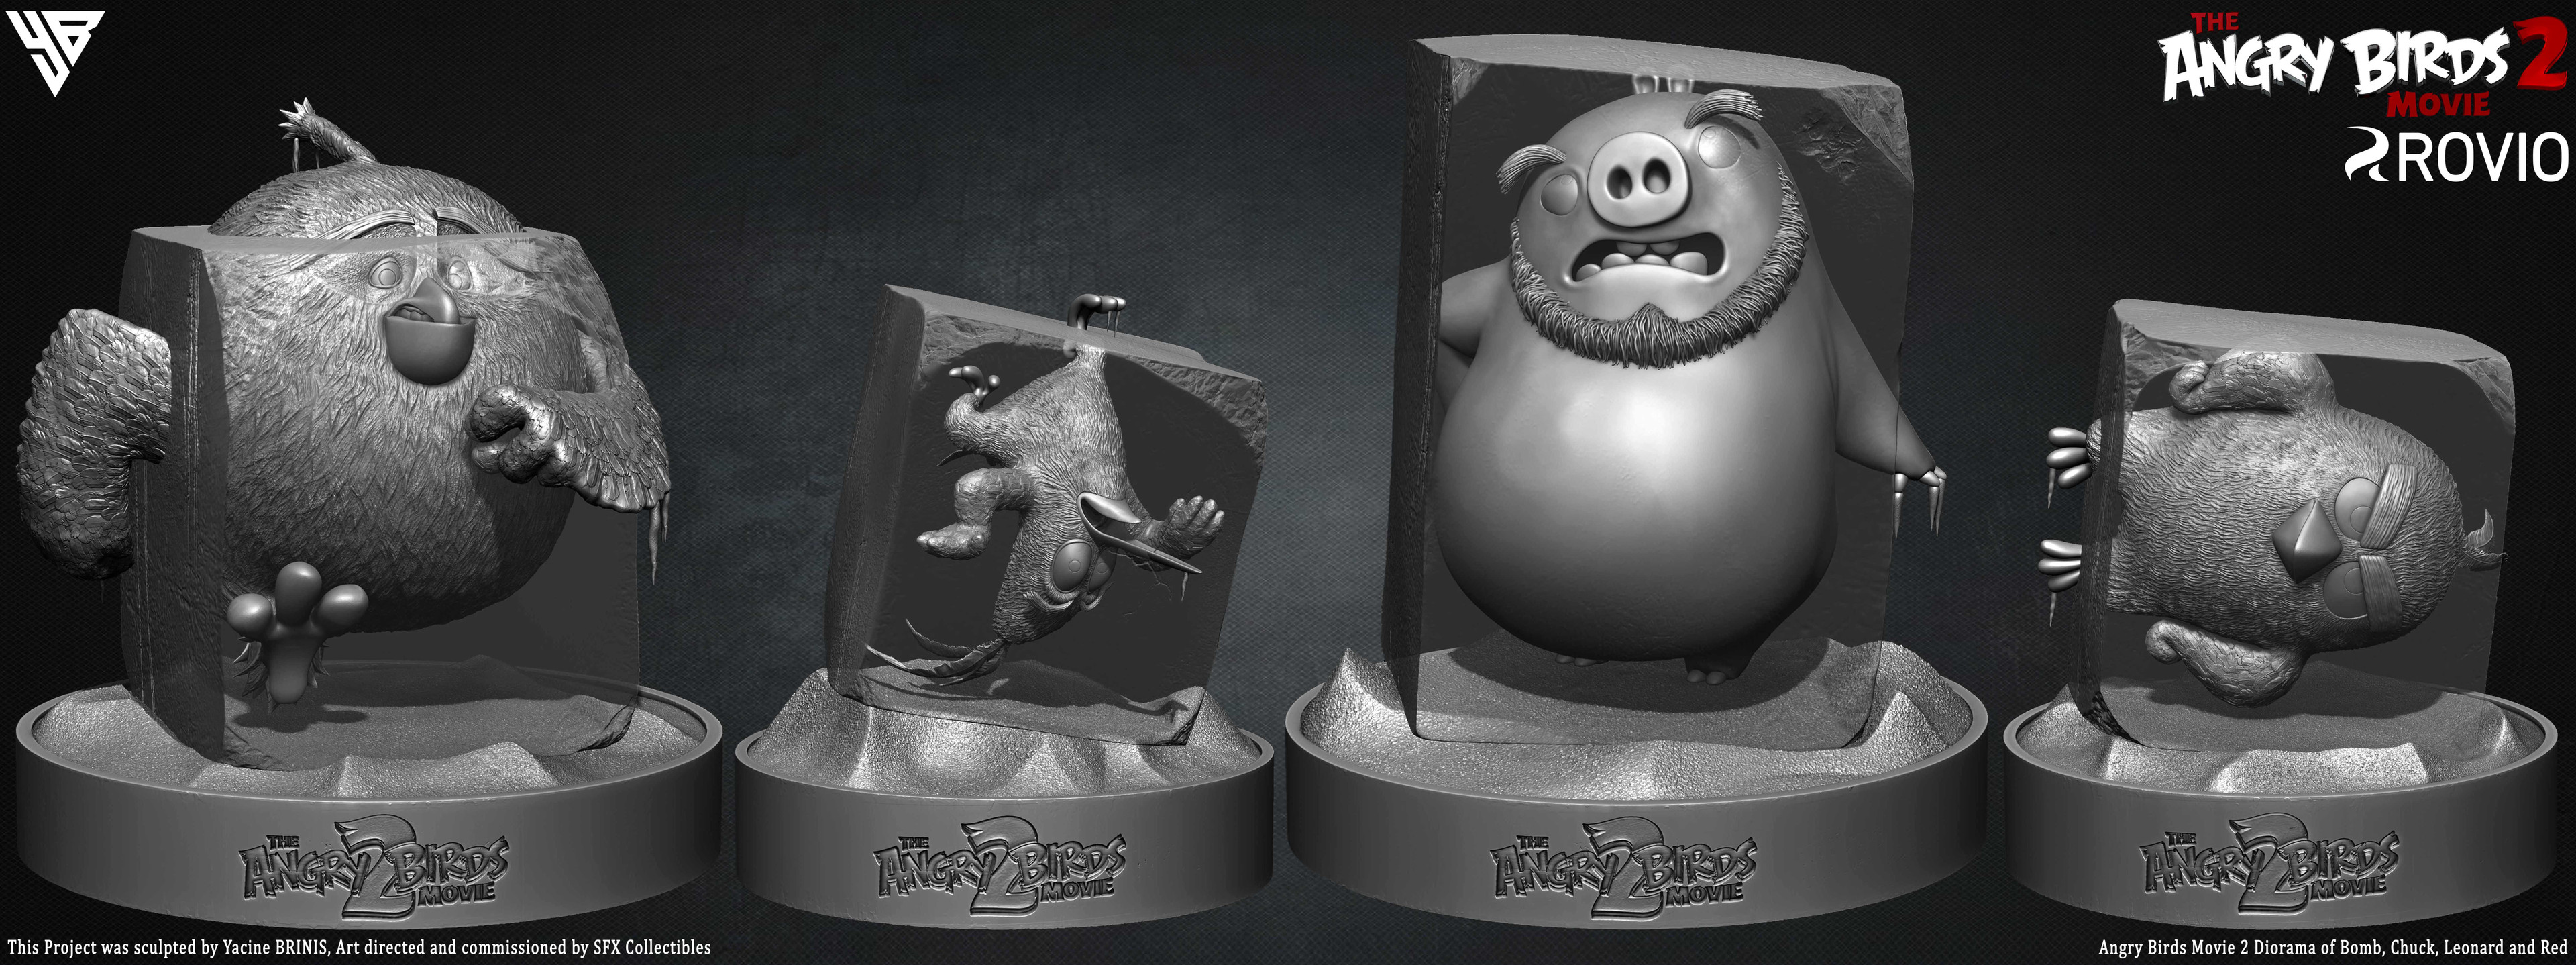 Angry Birds Movie 2 Rovio Entertainment Sculpted by Yacine BRINIS 001 Bomb, Chuck, Leonard, and Red